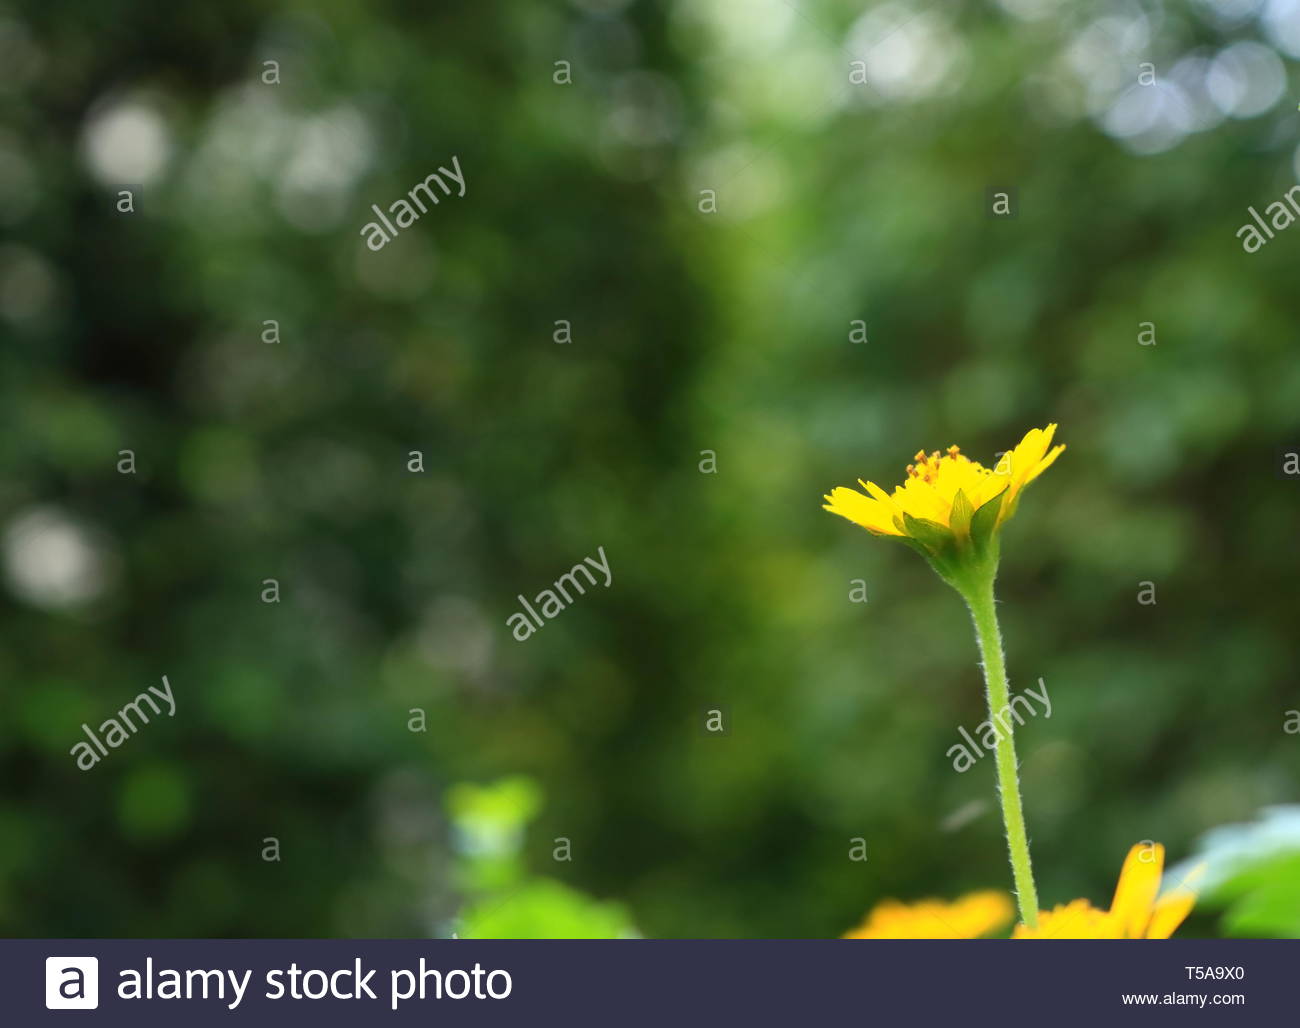 Dare To Stand Alone Creeping Daisy Flower With Bokeh Background